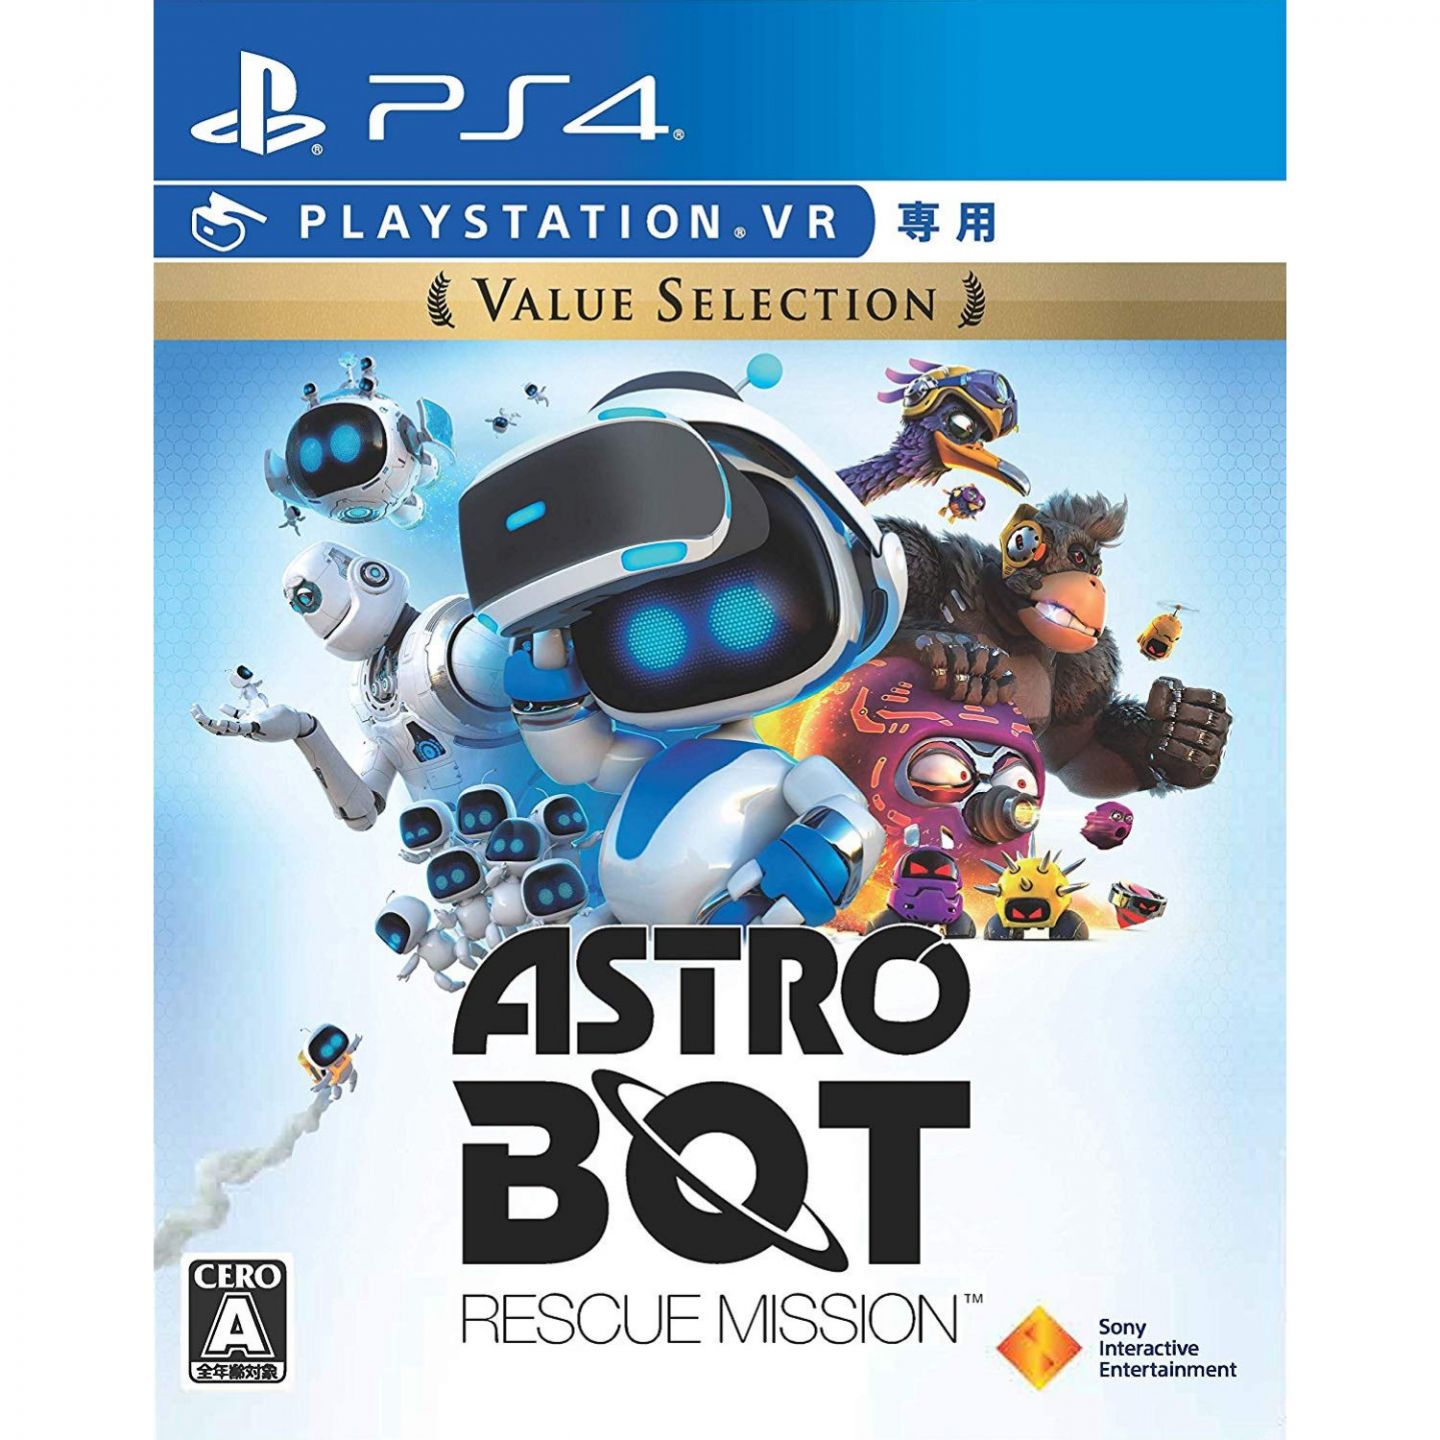 Rescue 4 PLAYSTATION Astro PS4 Bot VR SONY Mission